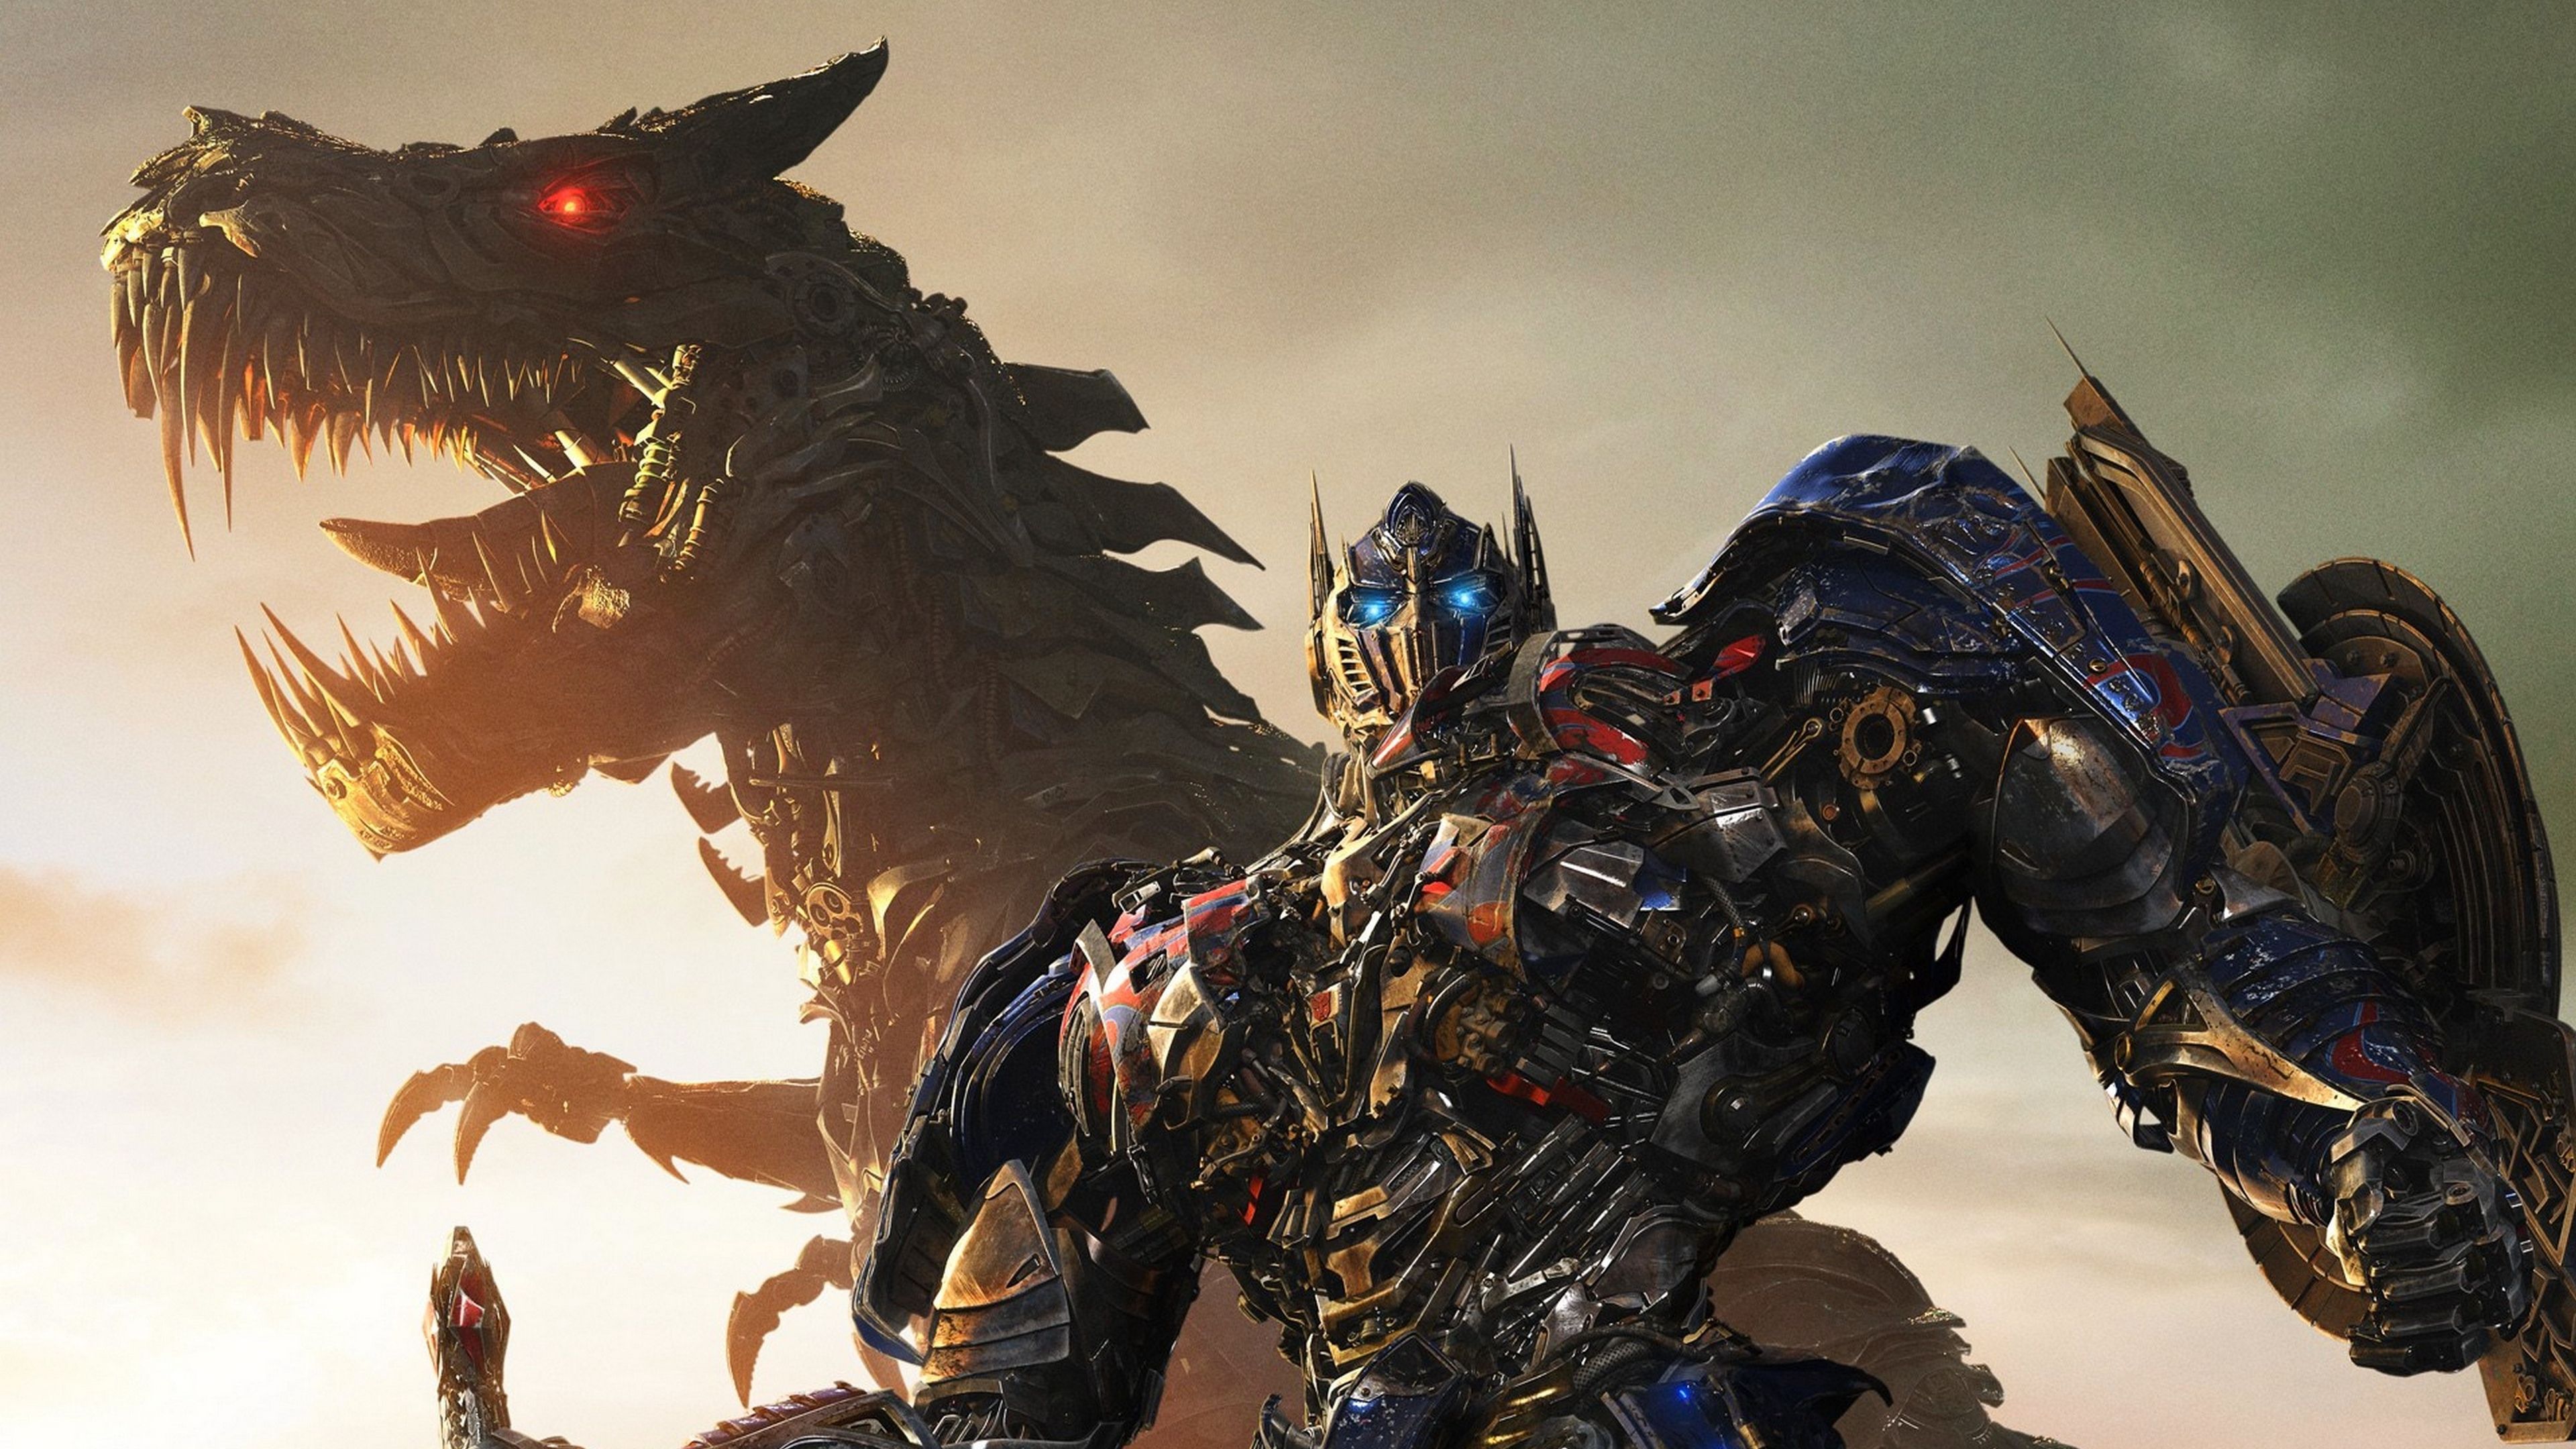 Download wallpaper 3840x2160 transformers age of extinction, optimus